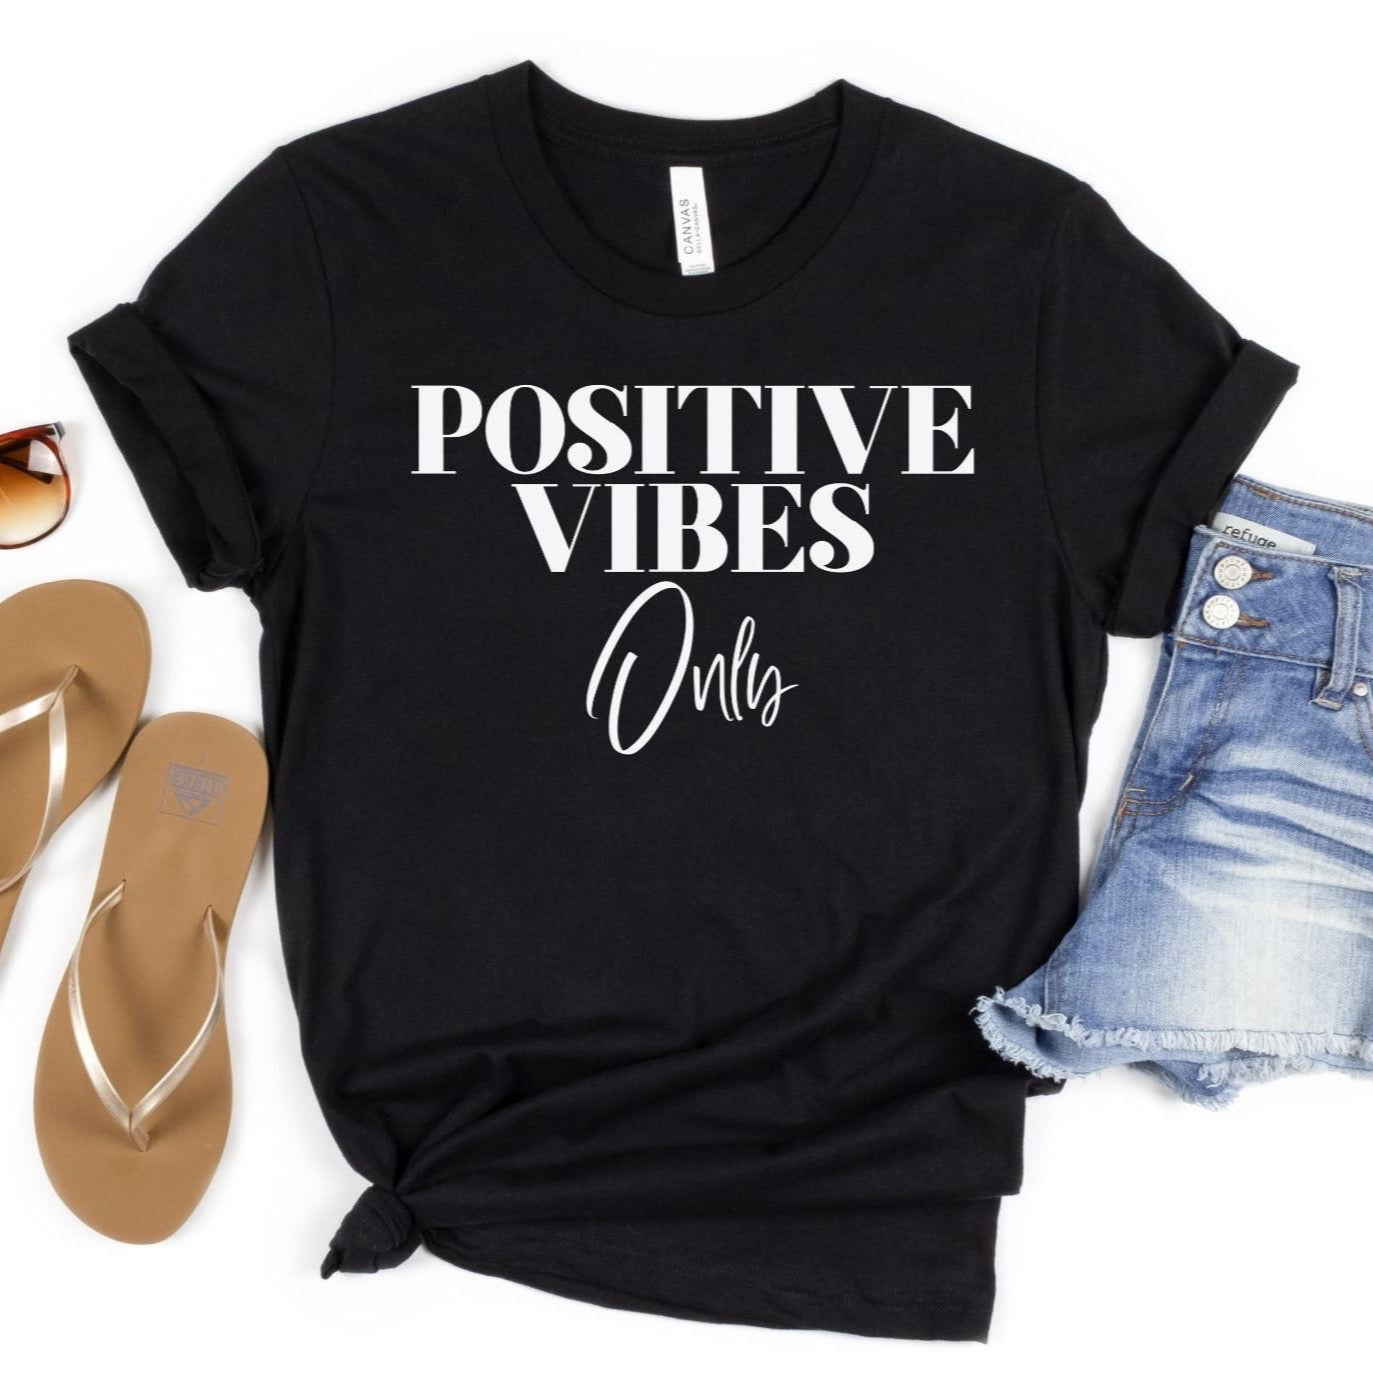 Positive Vibes Only T-Shirt, Black Shirt White Text